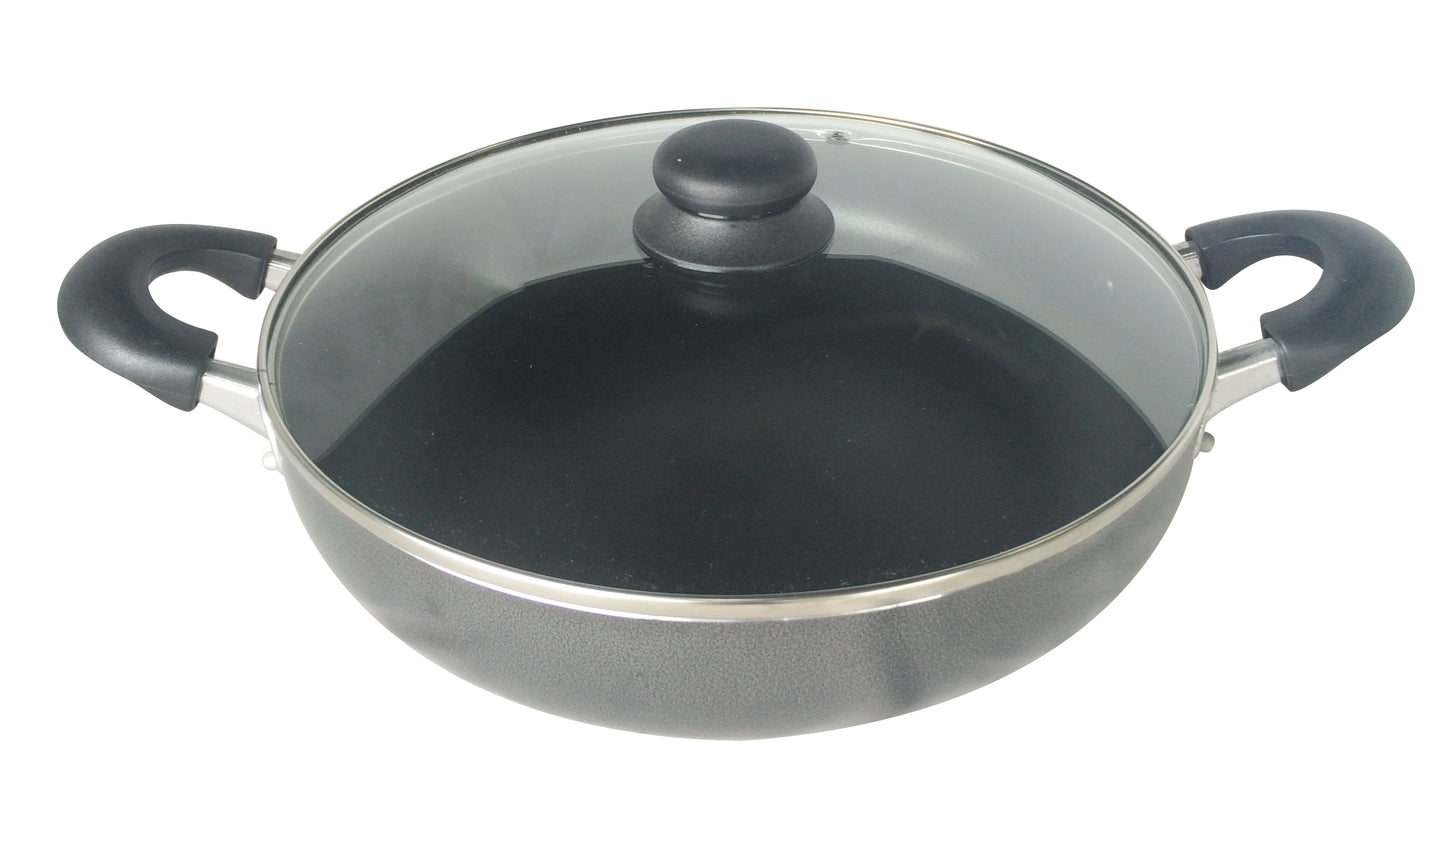  Bene Casa - Black Nonstick Aluminum Frying Pan with Glass Lid  (6) - Dishwasher Safe for Easy Cleaning: Pans: Home & Kitchen